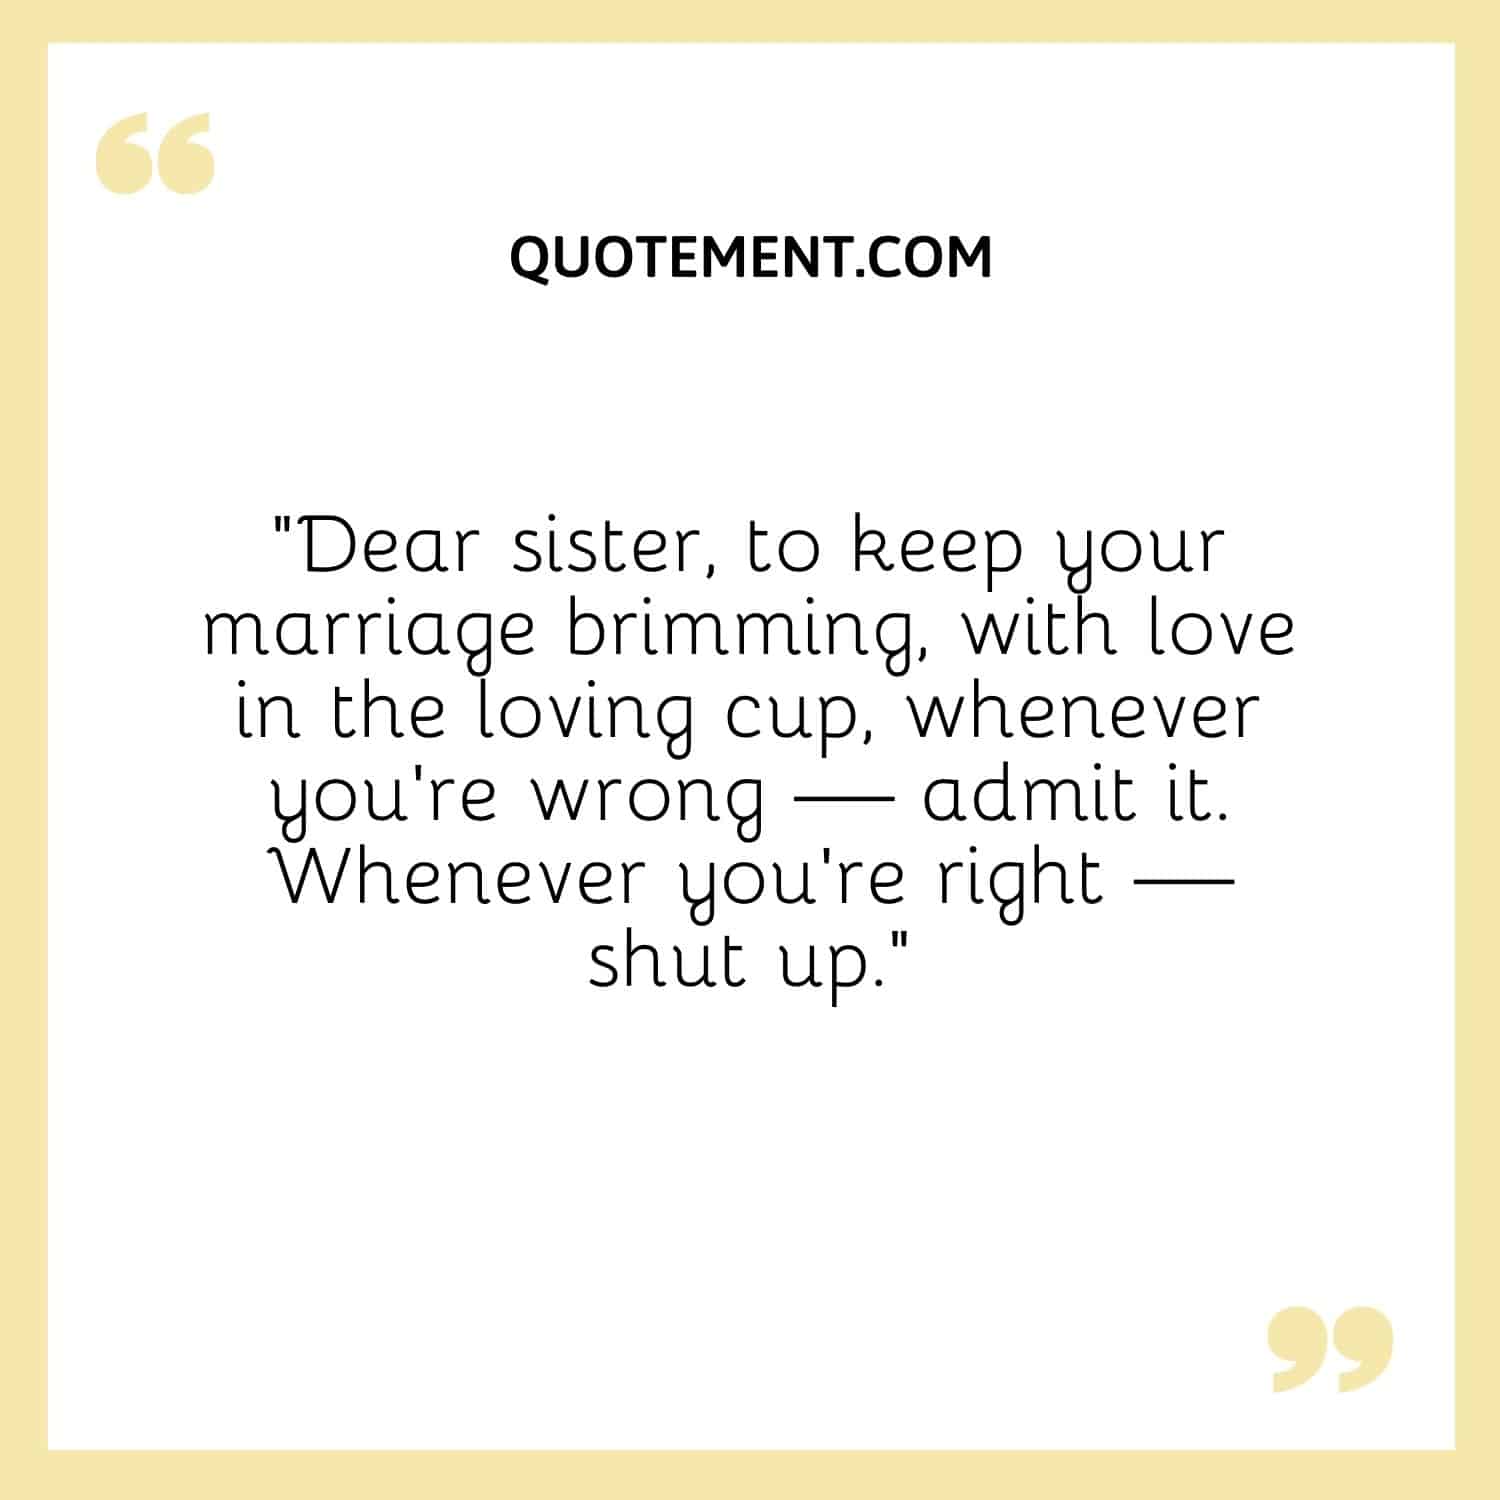 Dear sister, to keep your marriage brimming, with love in the loving cup, whenever you're wrong — admit it